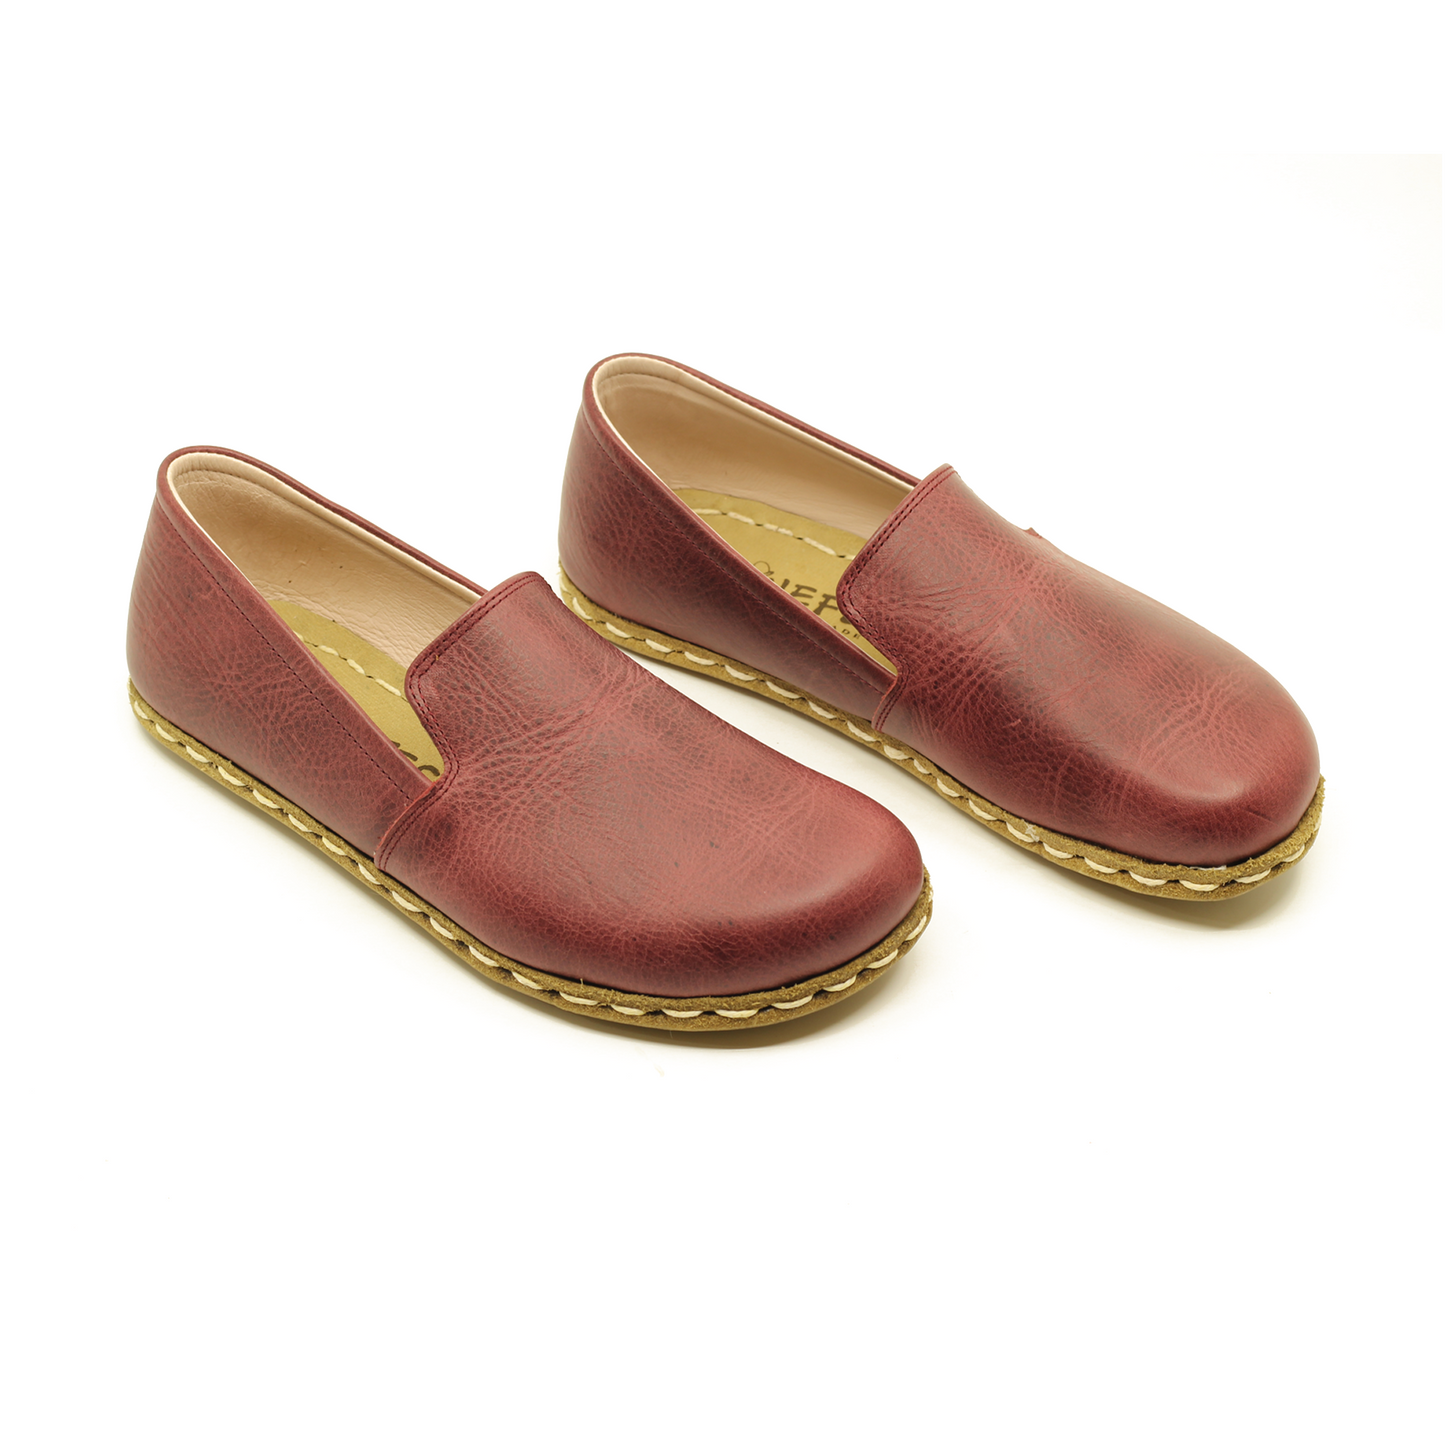 Burgundy Barefoot Shoes - Experience the Benefits of Barefoot Walking in Style and Comfort